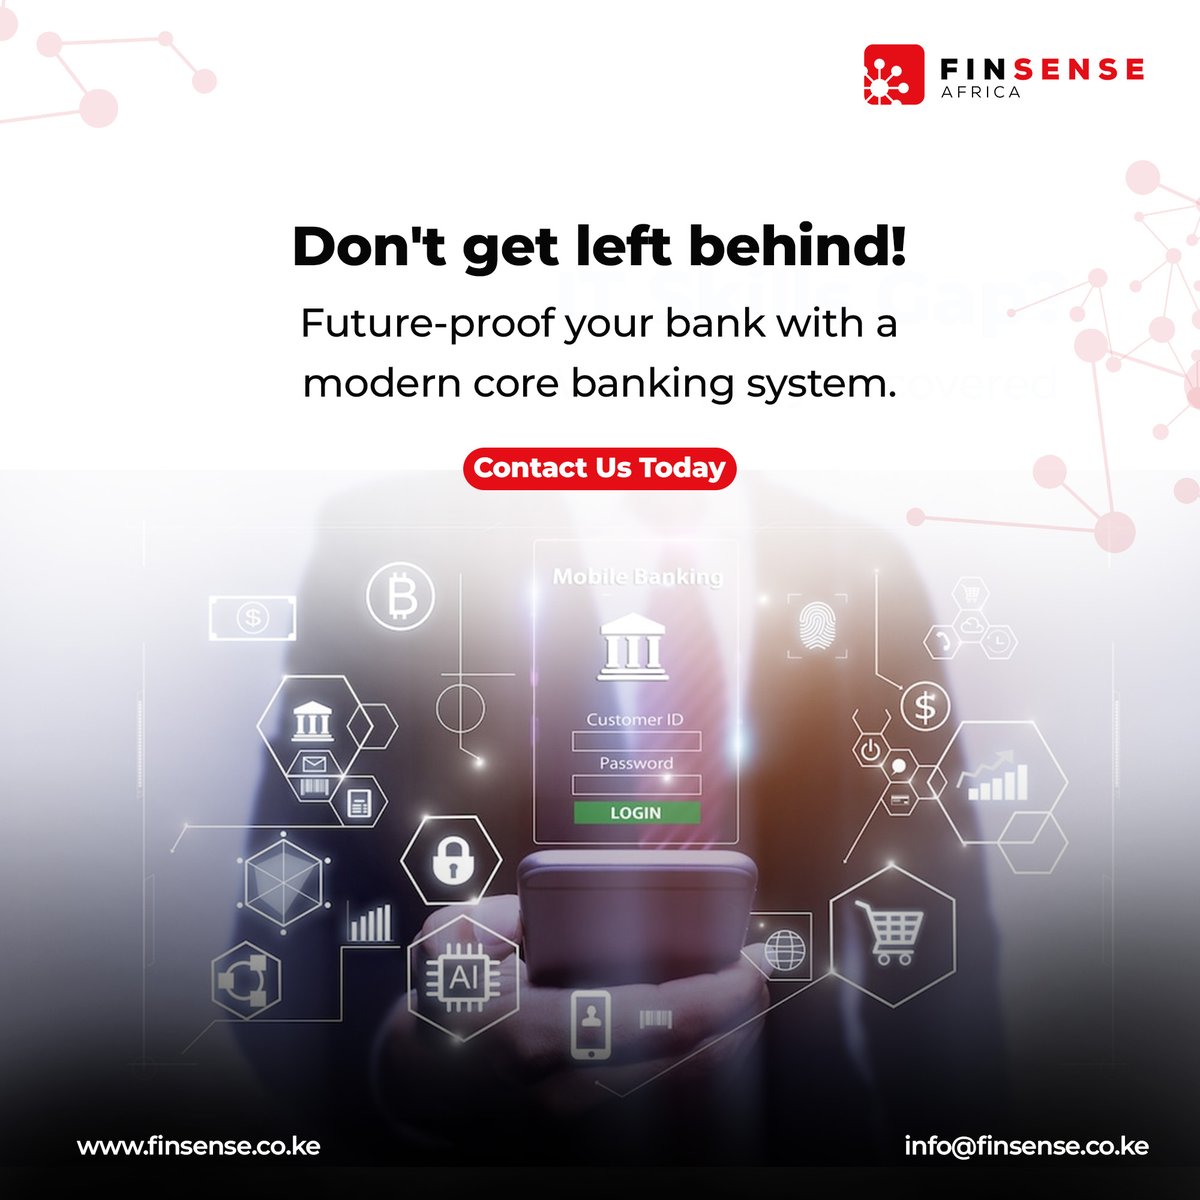 Don't get left behind!  Future-proof your bank with a modern core banking system. 

Finsense Africa can help you navigate the migration process seamlessly. 

Contact us today; info@finsense.co.ke

 #corebanking #bankingtechnology